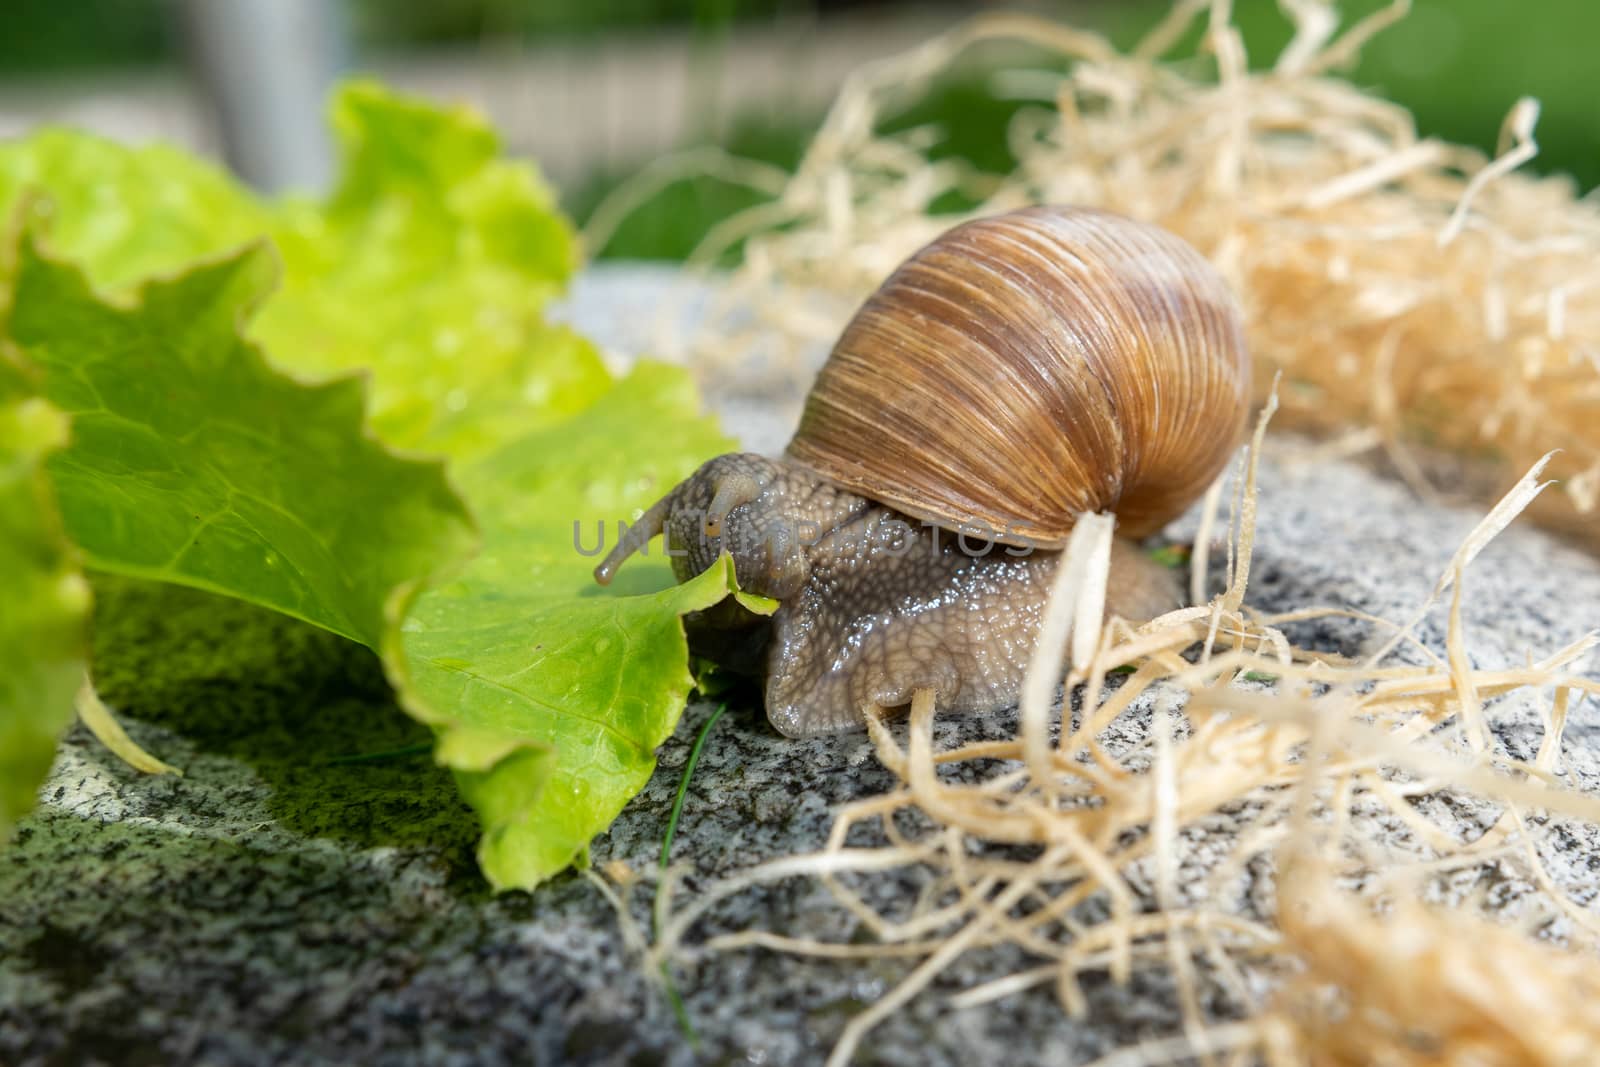 Burgundy snail on a stone moving to a salad leaf